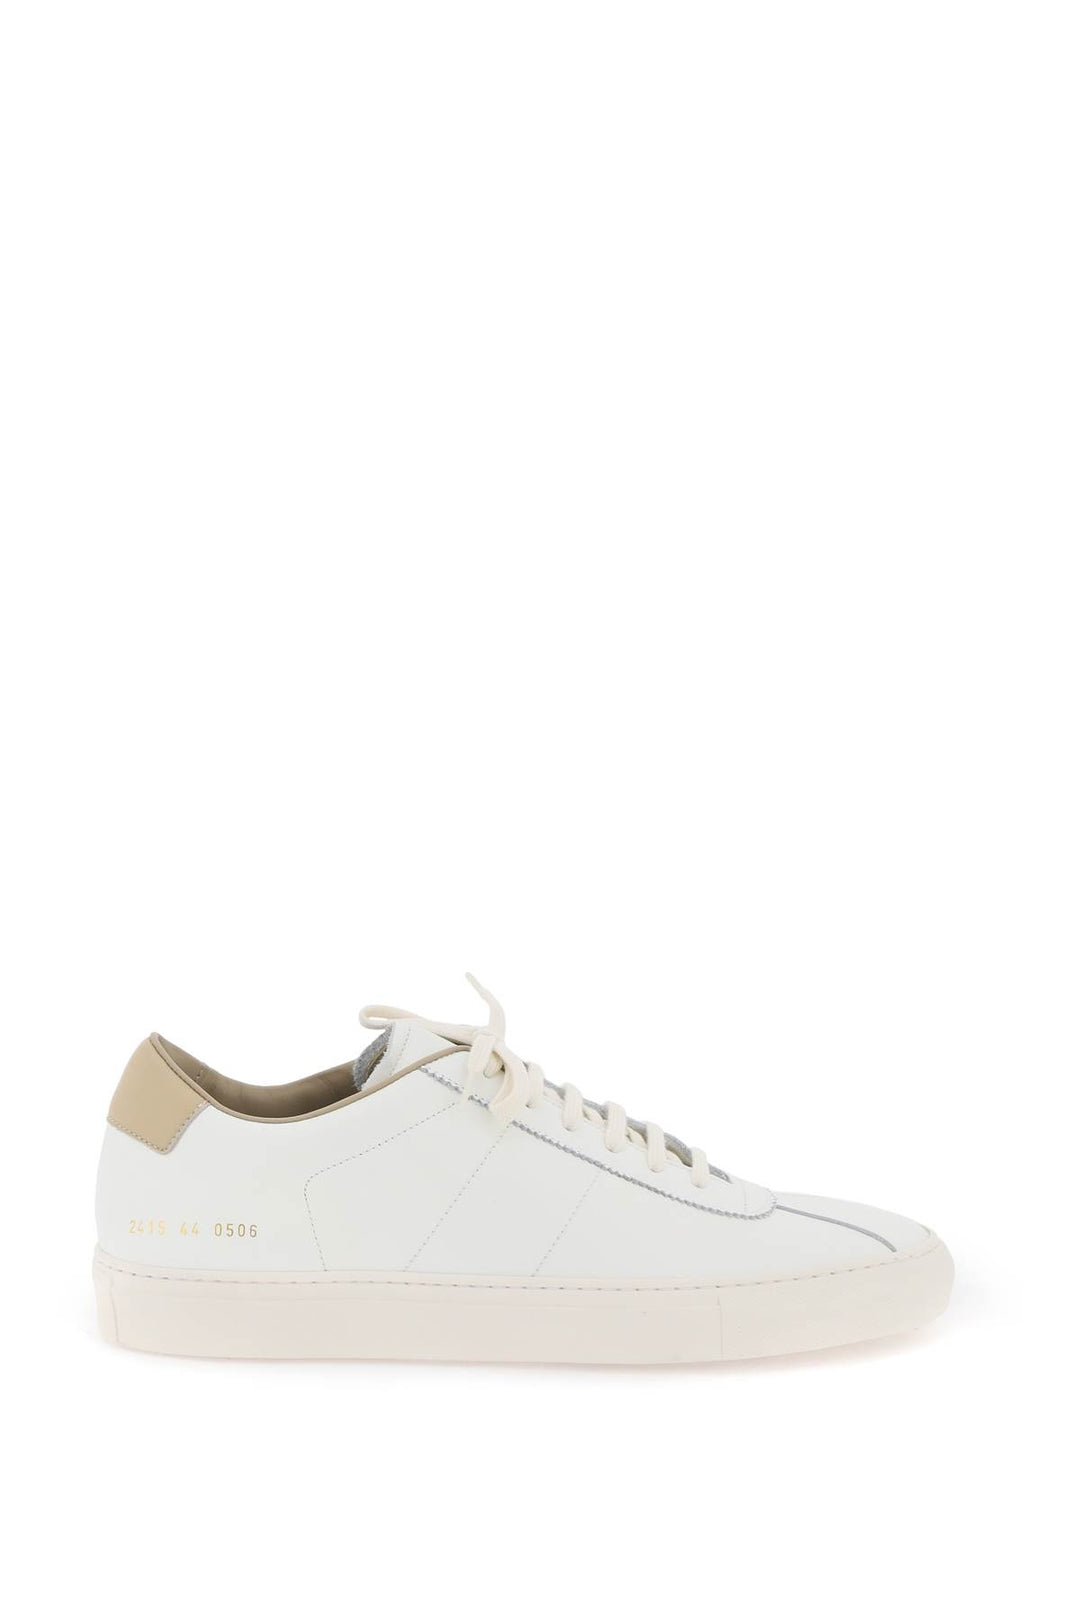 Common Projects 70's Tennis Sneaker   White